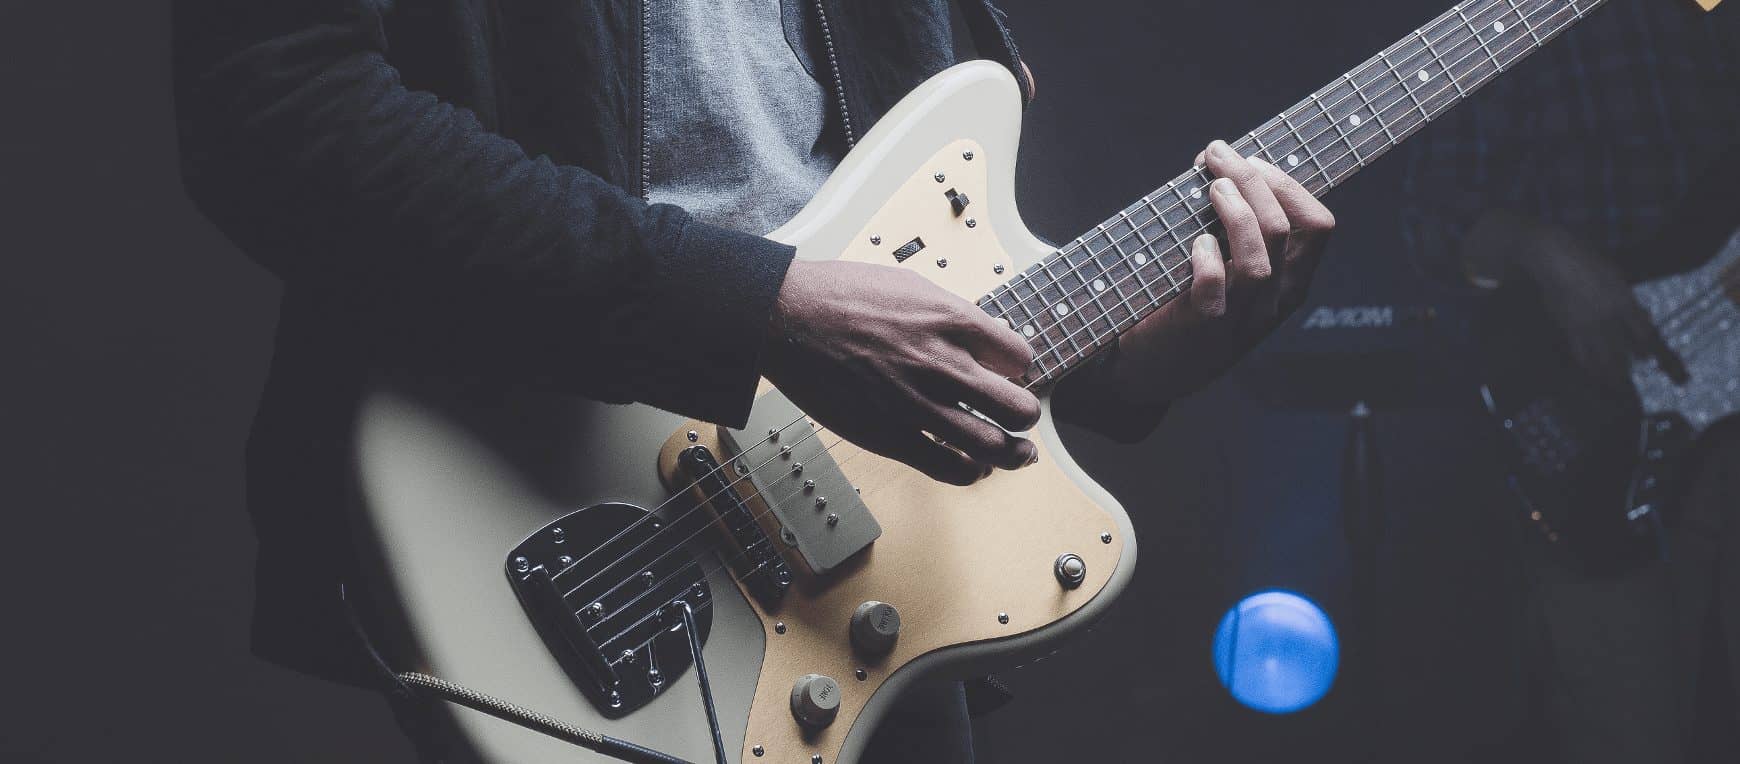 How to Play Rhythm Guitar Better with 6 Simple Practice Techniques